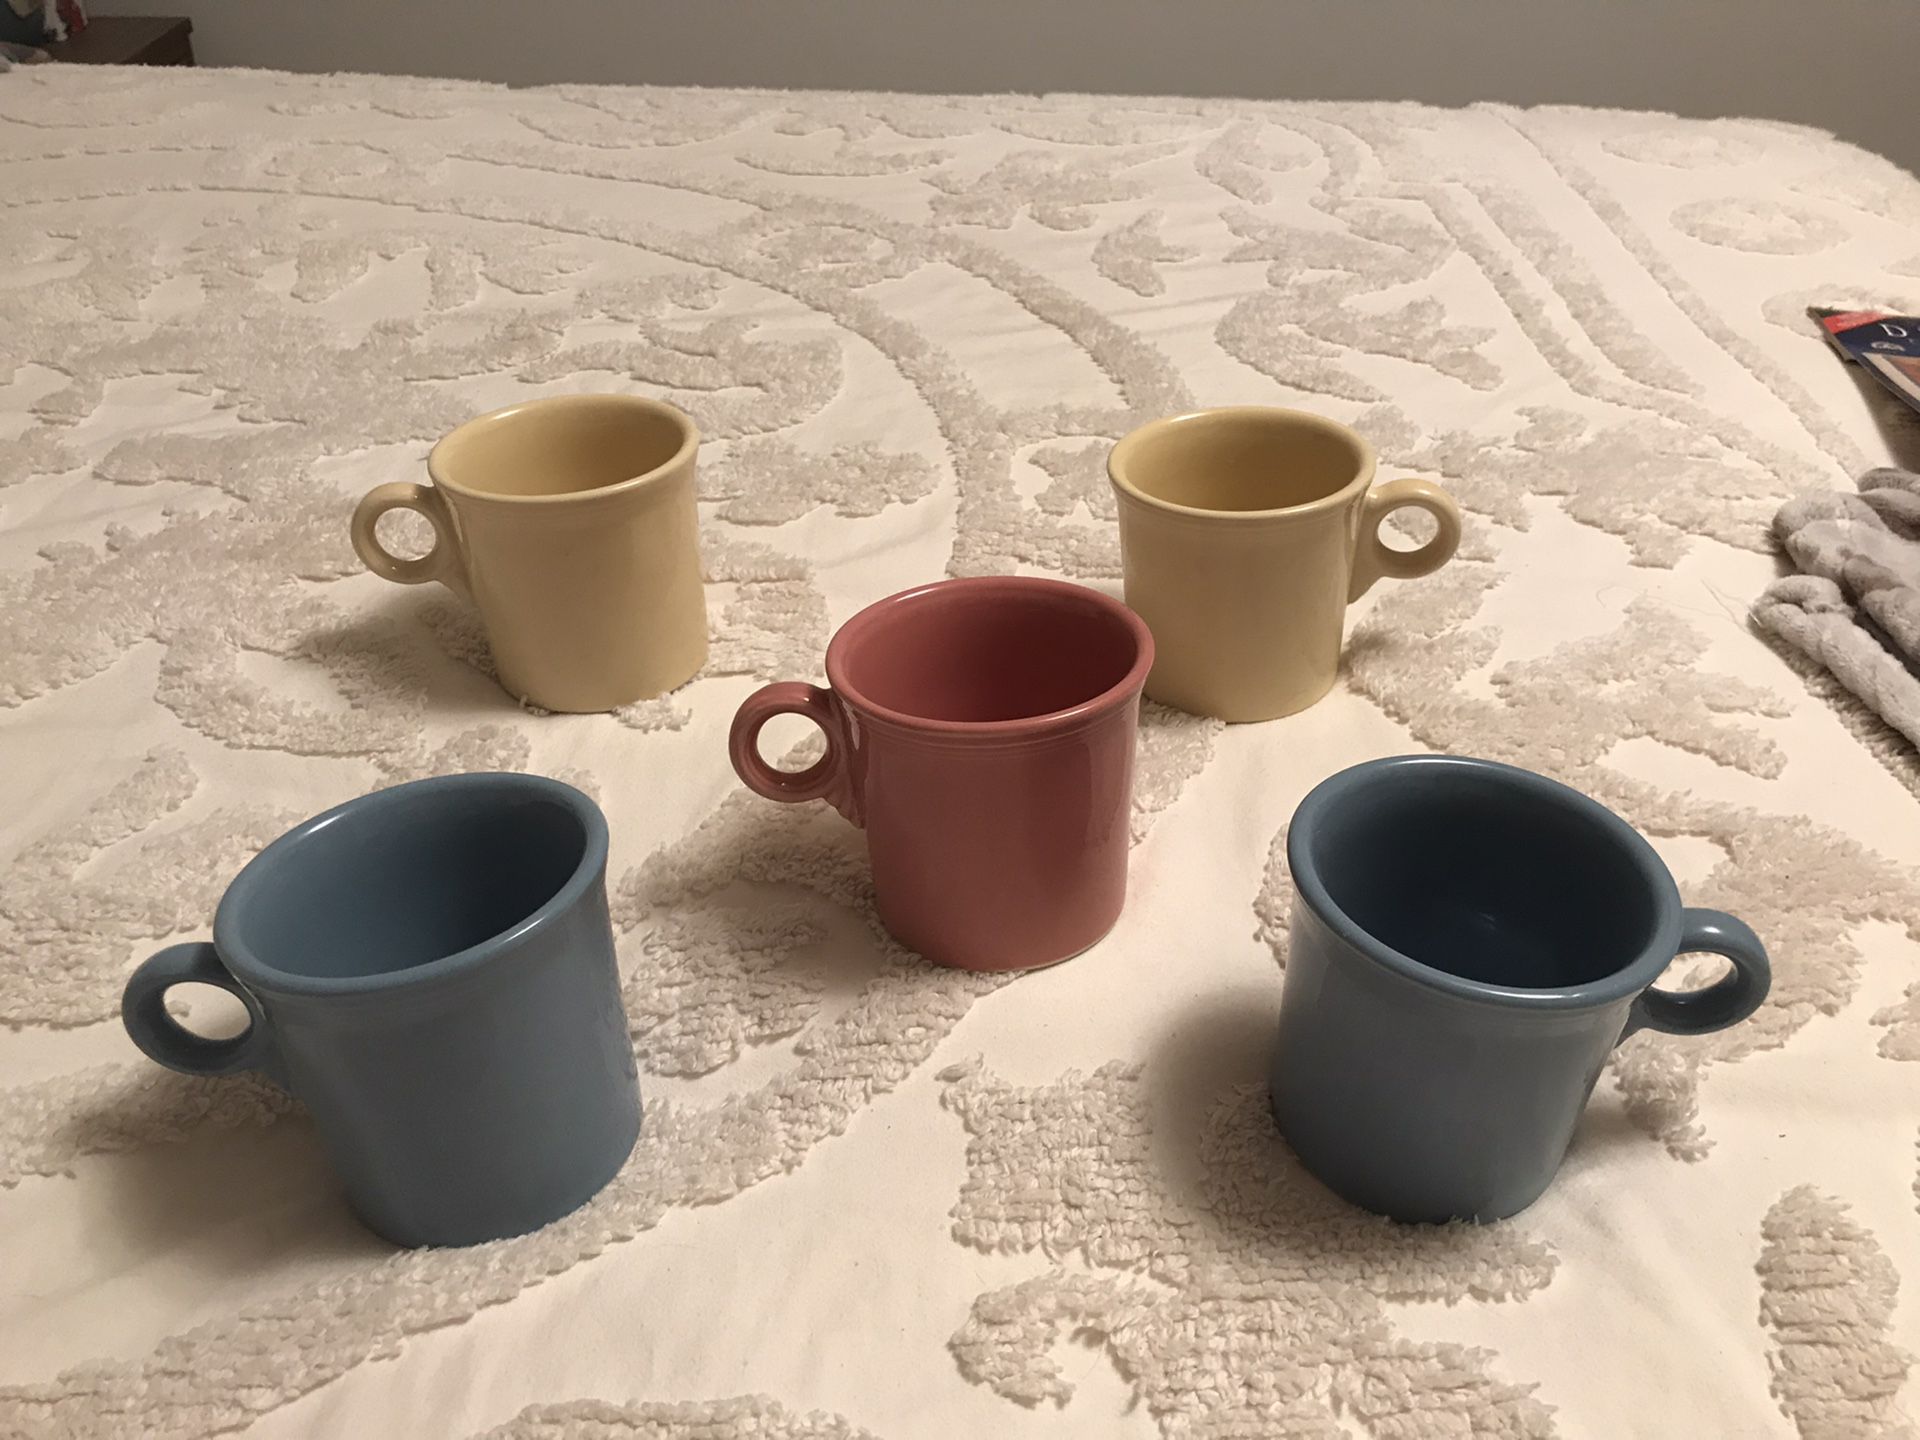 5 Fiestaware Coffee Mug Circle Handle Cups 10 Oz. Condition is Used. No cracks or chips.